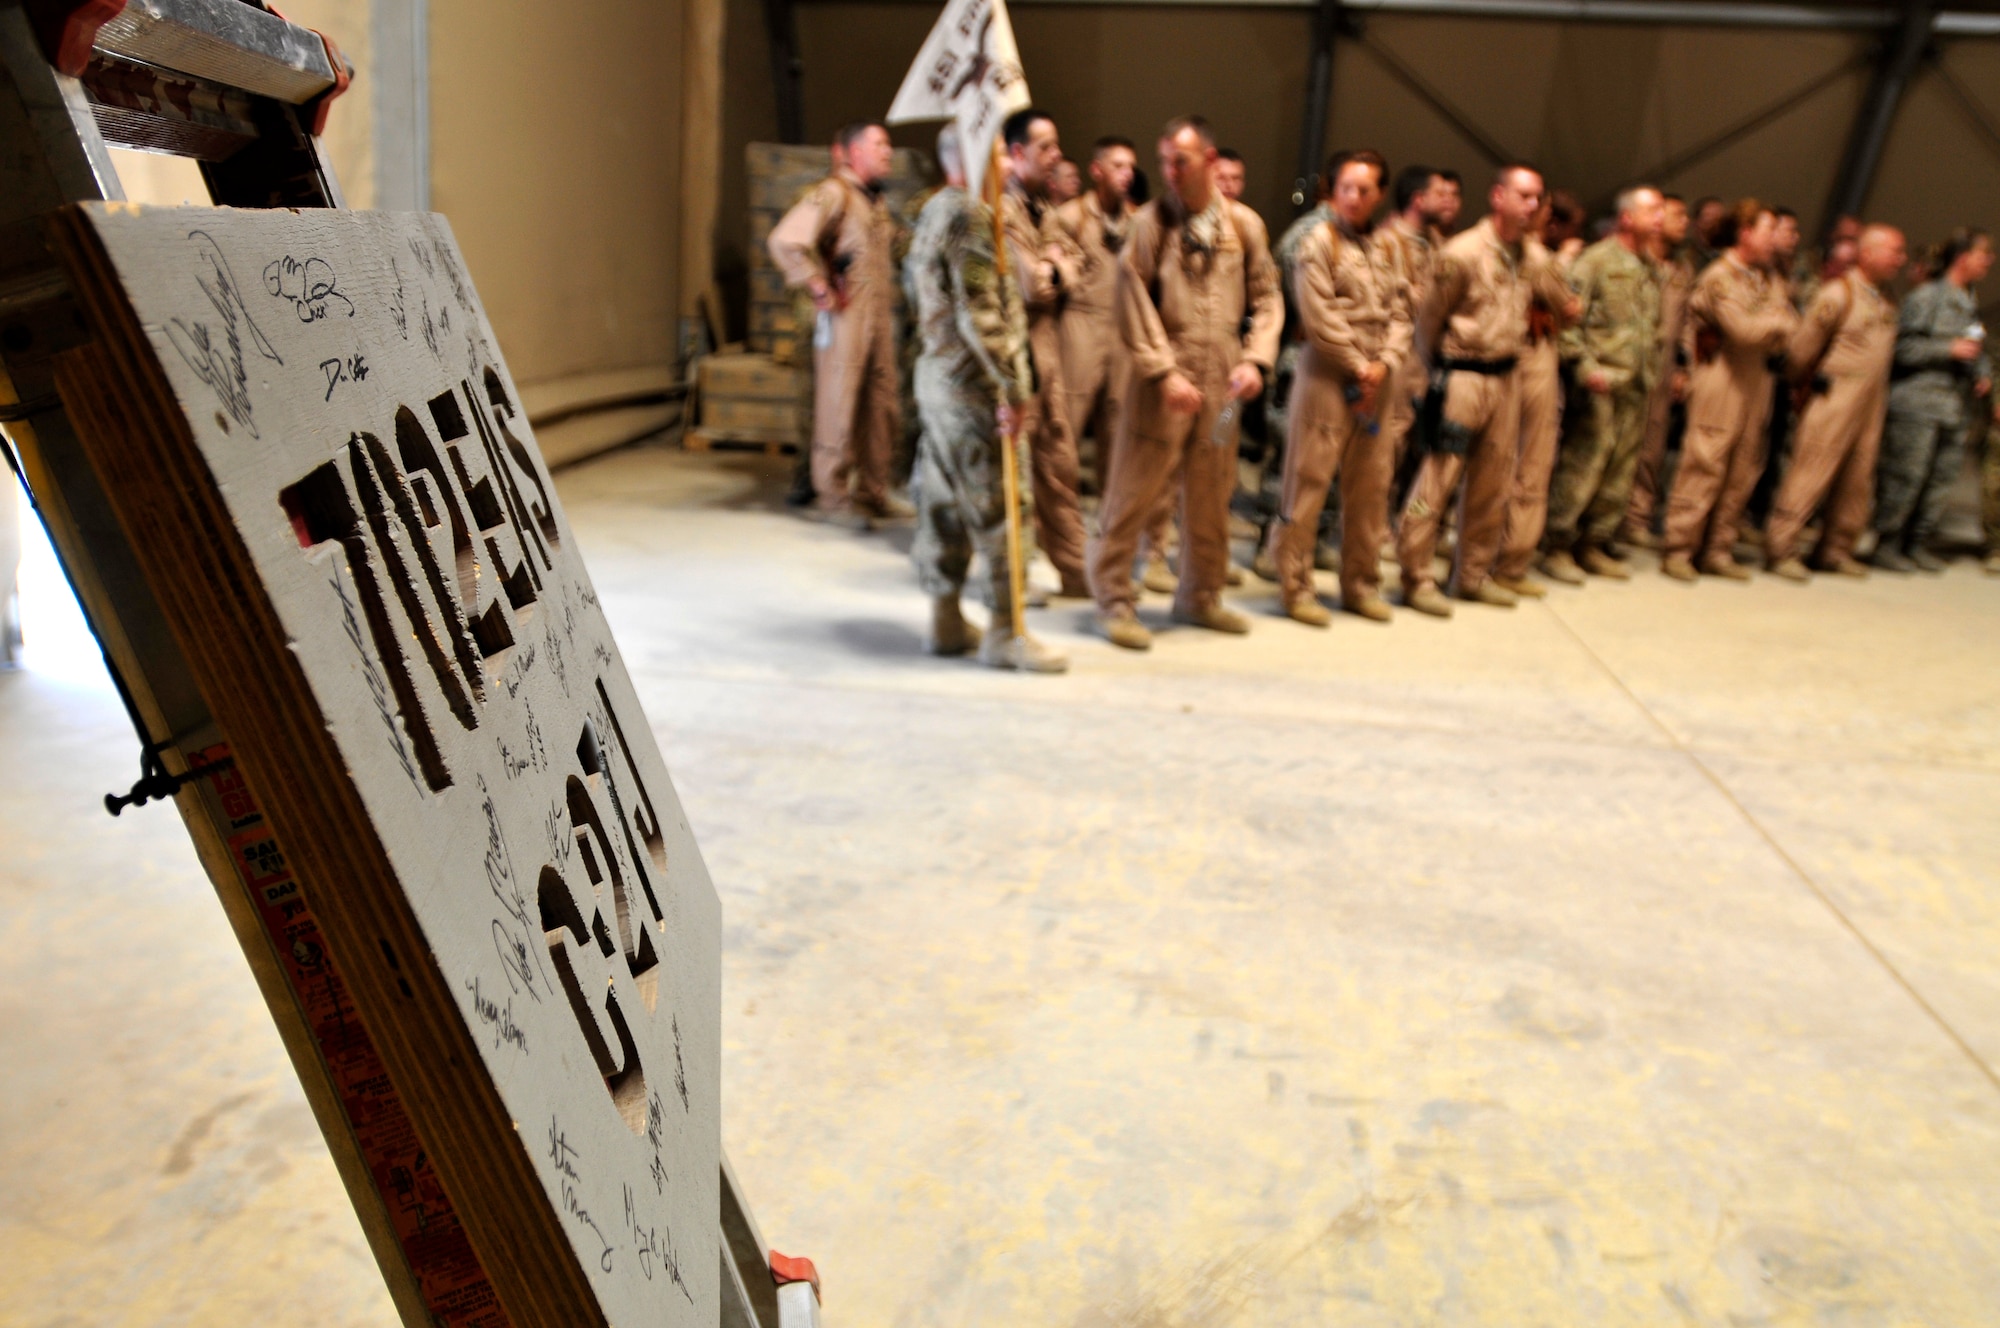 Aircrew and ground support personnel of the 702nd Expeditionary Airlift Squadron form up for their deactivation ceremony at Kandahar Airfield.  The squadron was established in July 2011 and was deactivated on Monday.  The squadron supported tactical airlift requirements in support of operations in Afghanistan (U.S. Army Photo - Sgt. Daniel J. Schroeder)